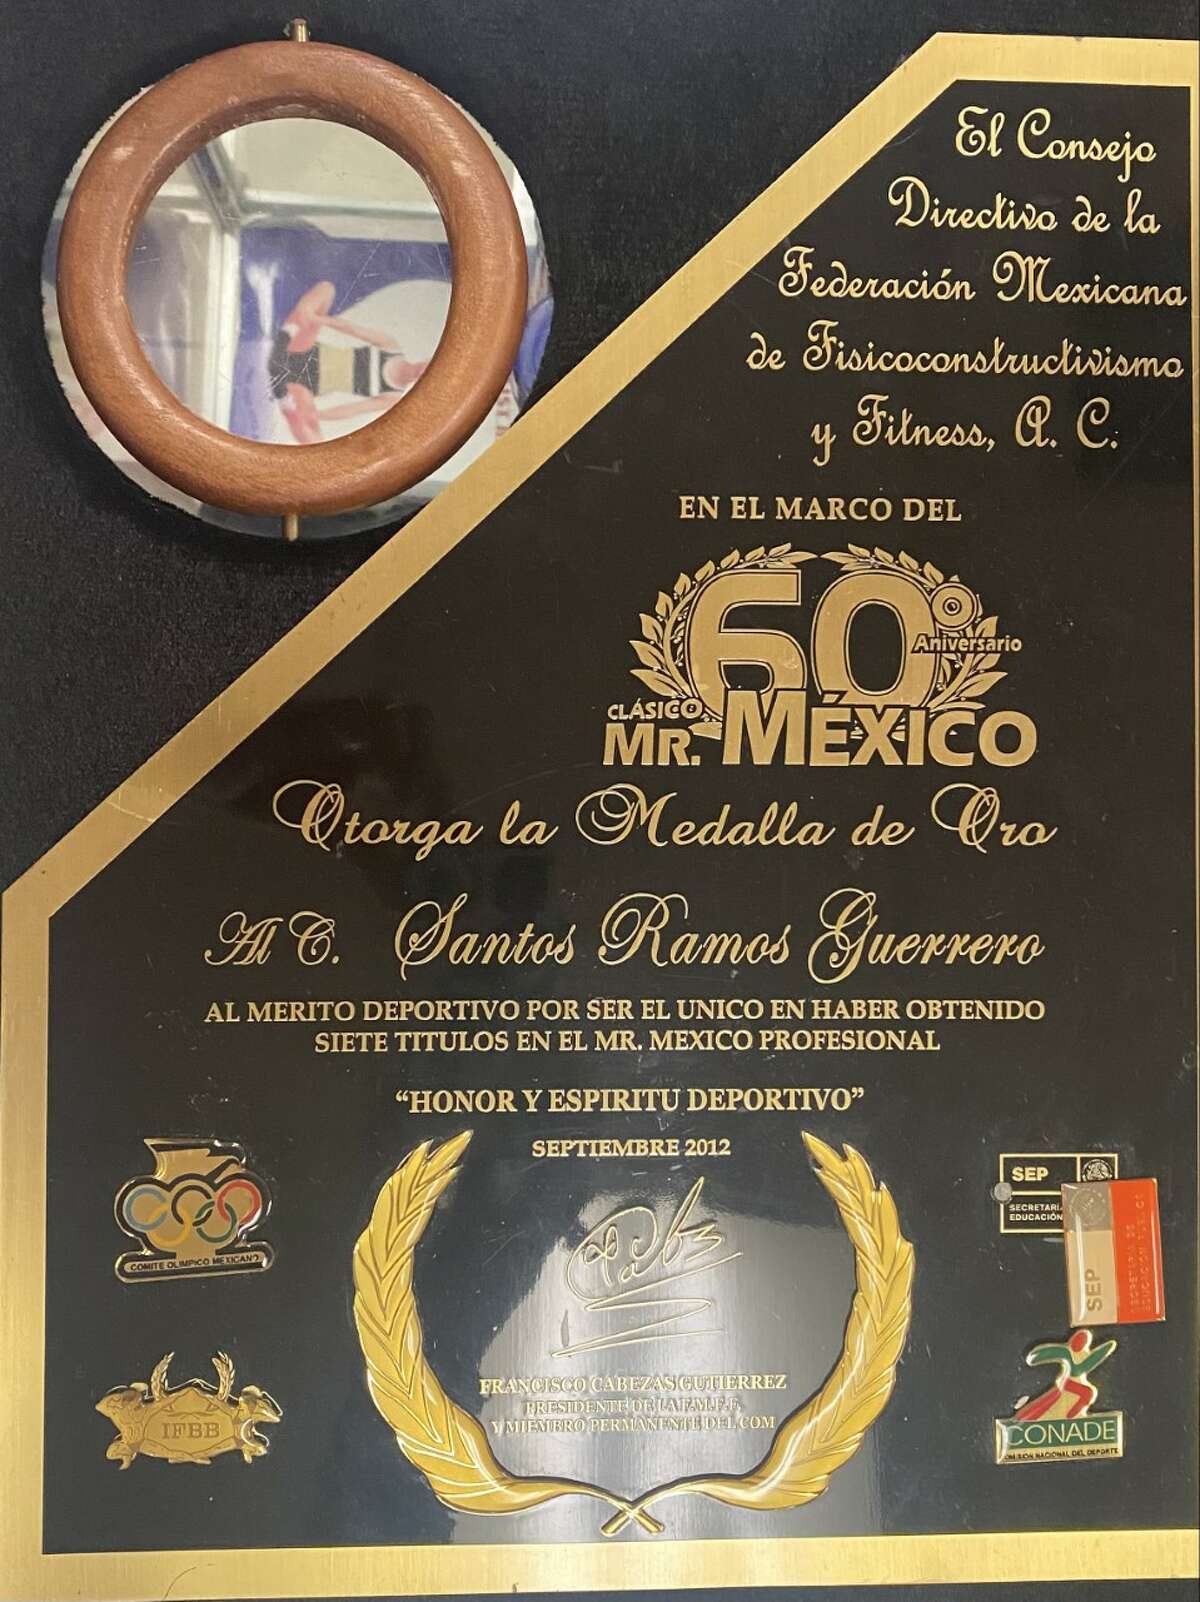 Santos Ramos was recognized with the Gold Medal for Sports Merit by the Mexican Bodybuilding Federation for being the only one to have obtained the Mr. Mexico title seven times.